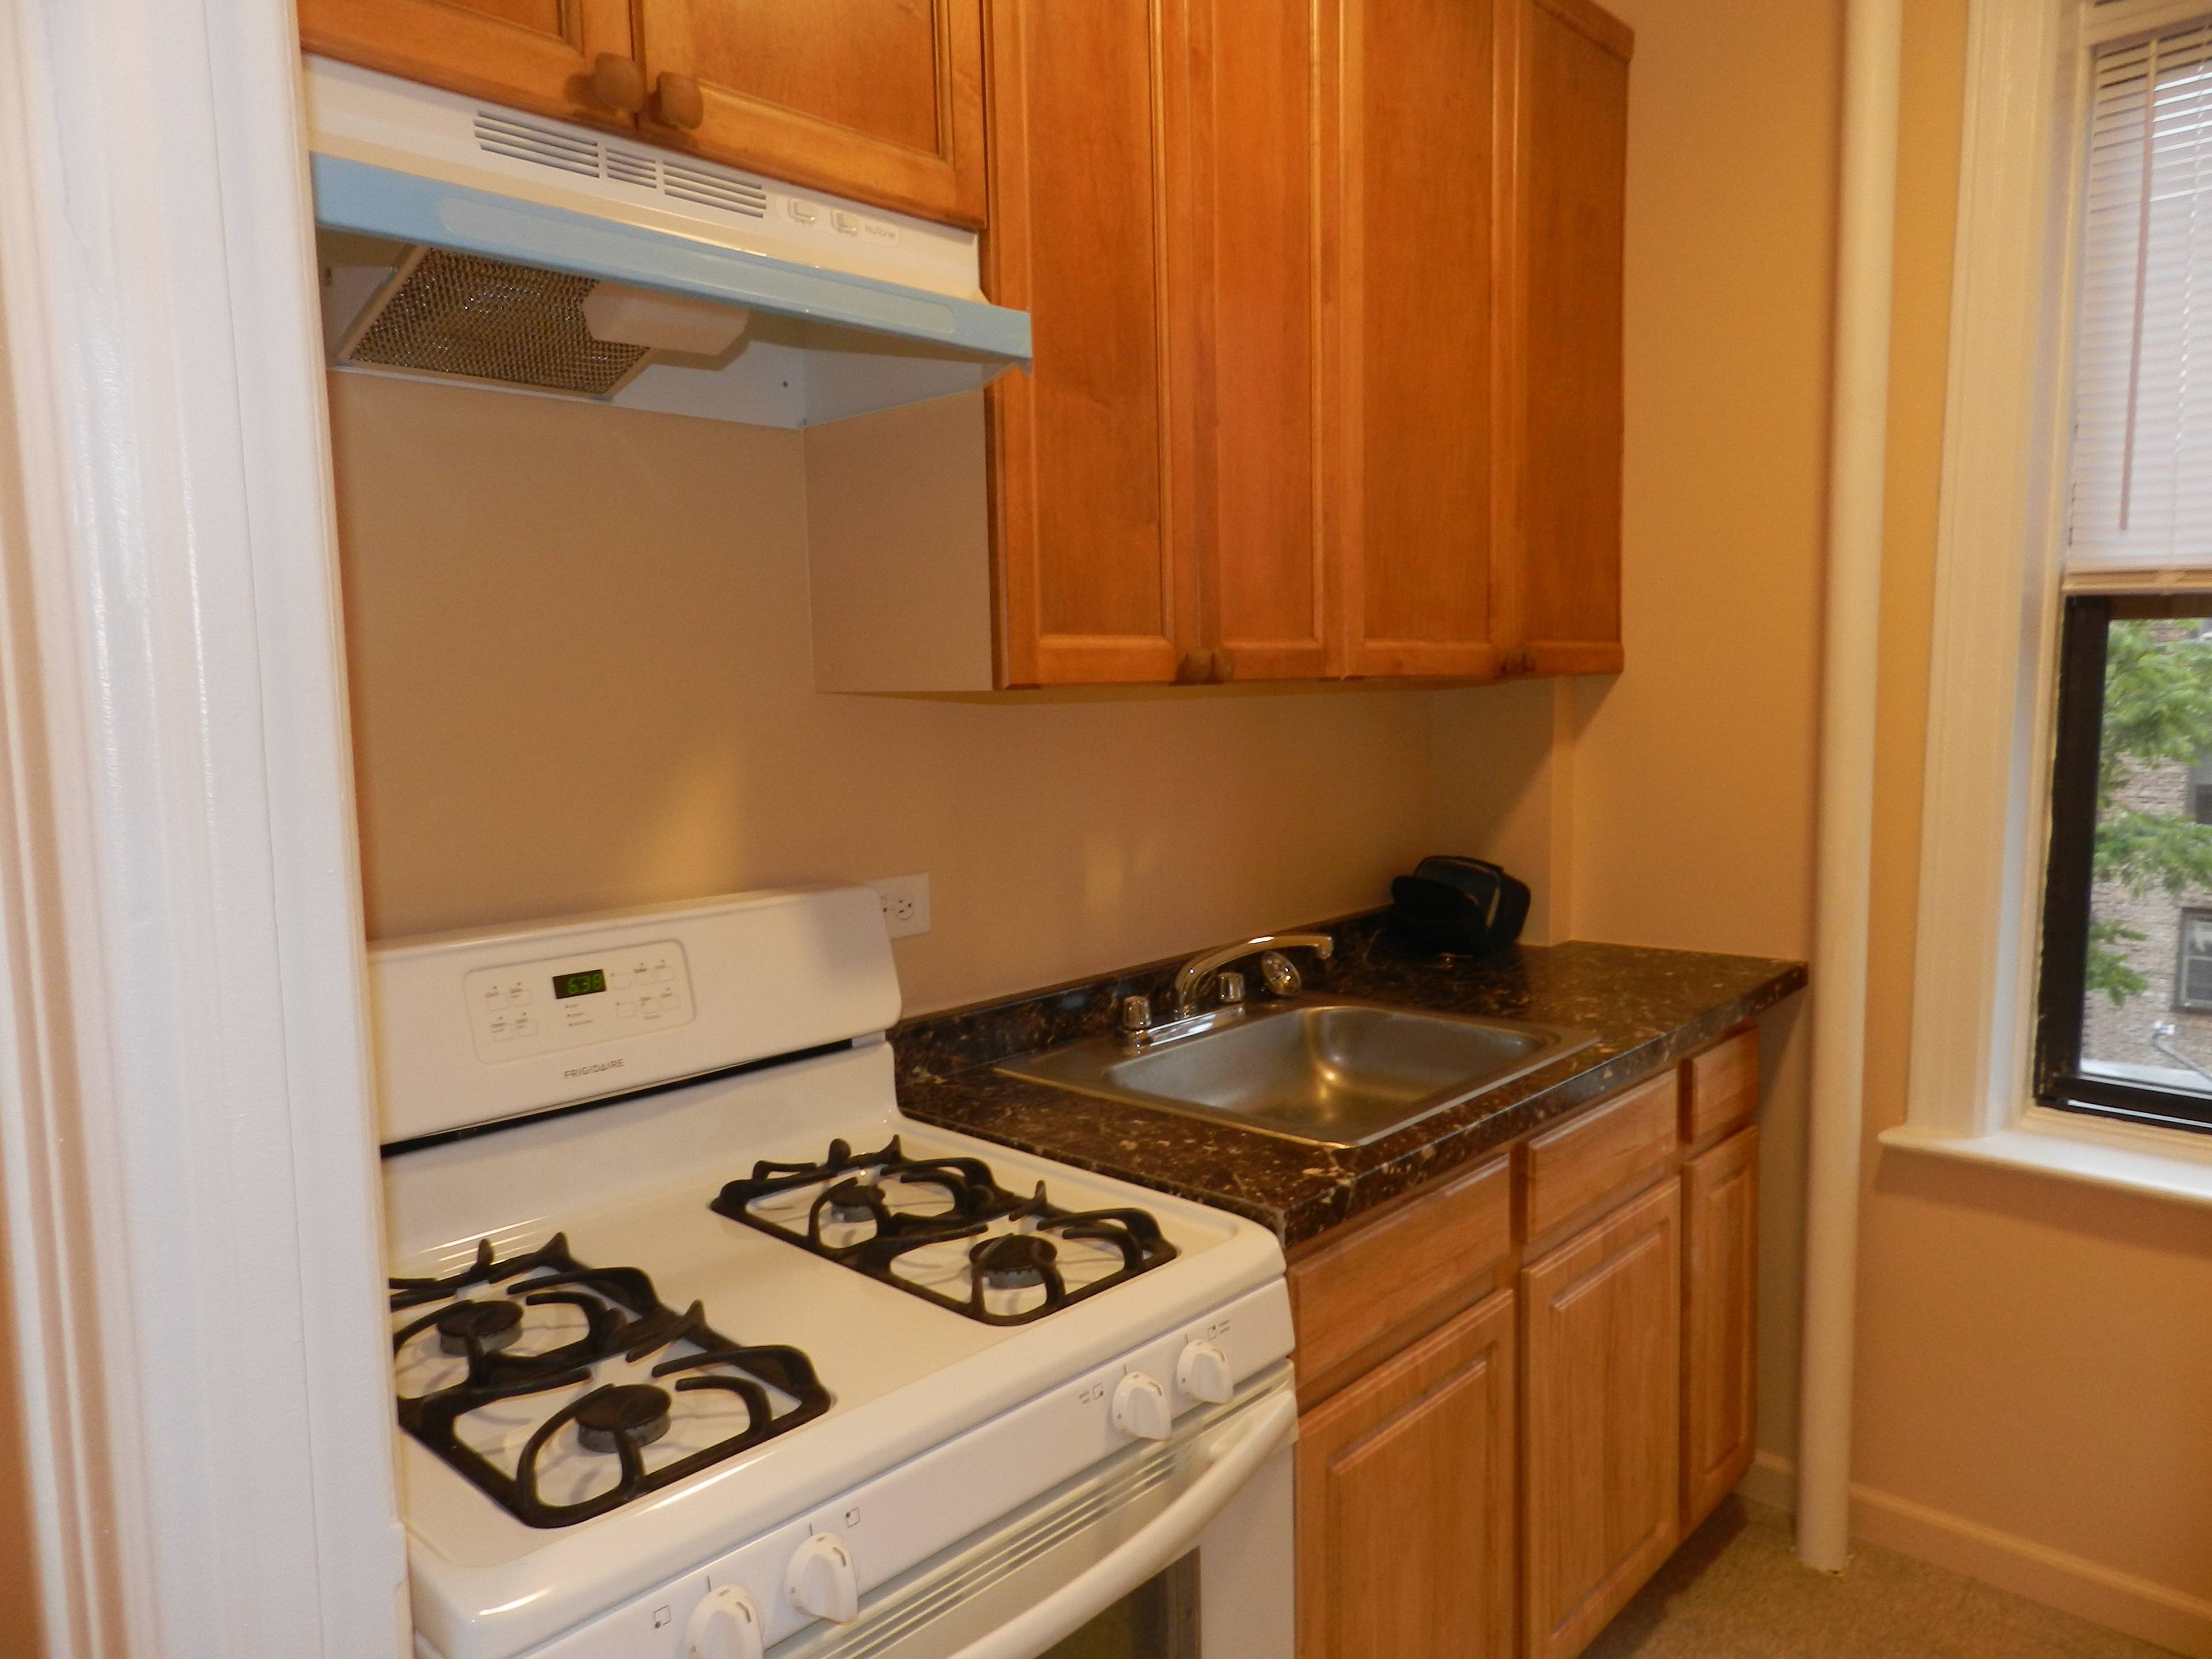 Huge 1 Bedroom Apartment - Two Blocks from 7 Train in Prime Sunnyside - 15 Minutes from Grand Central!!